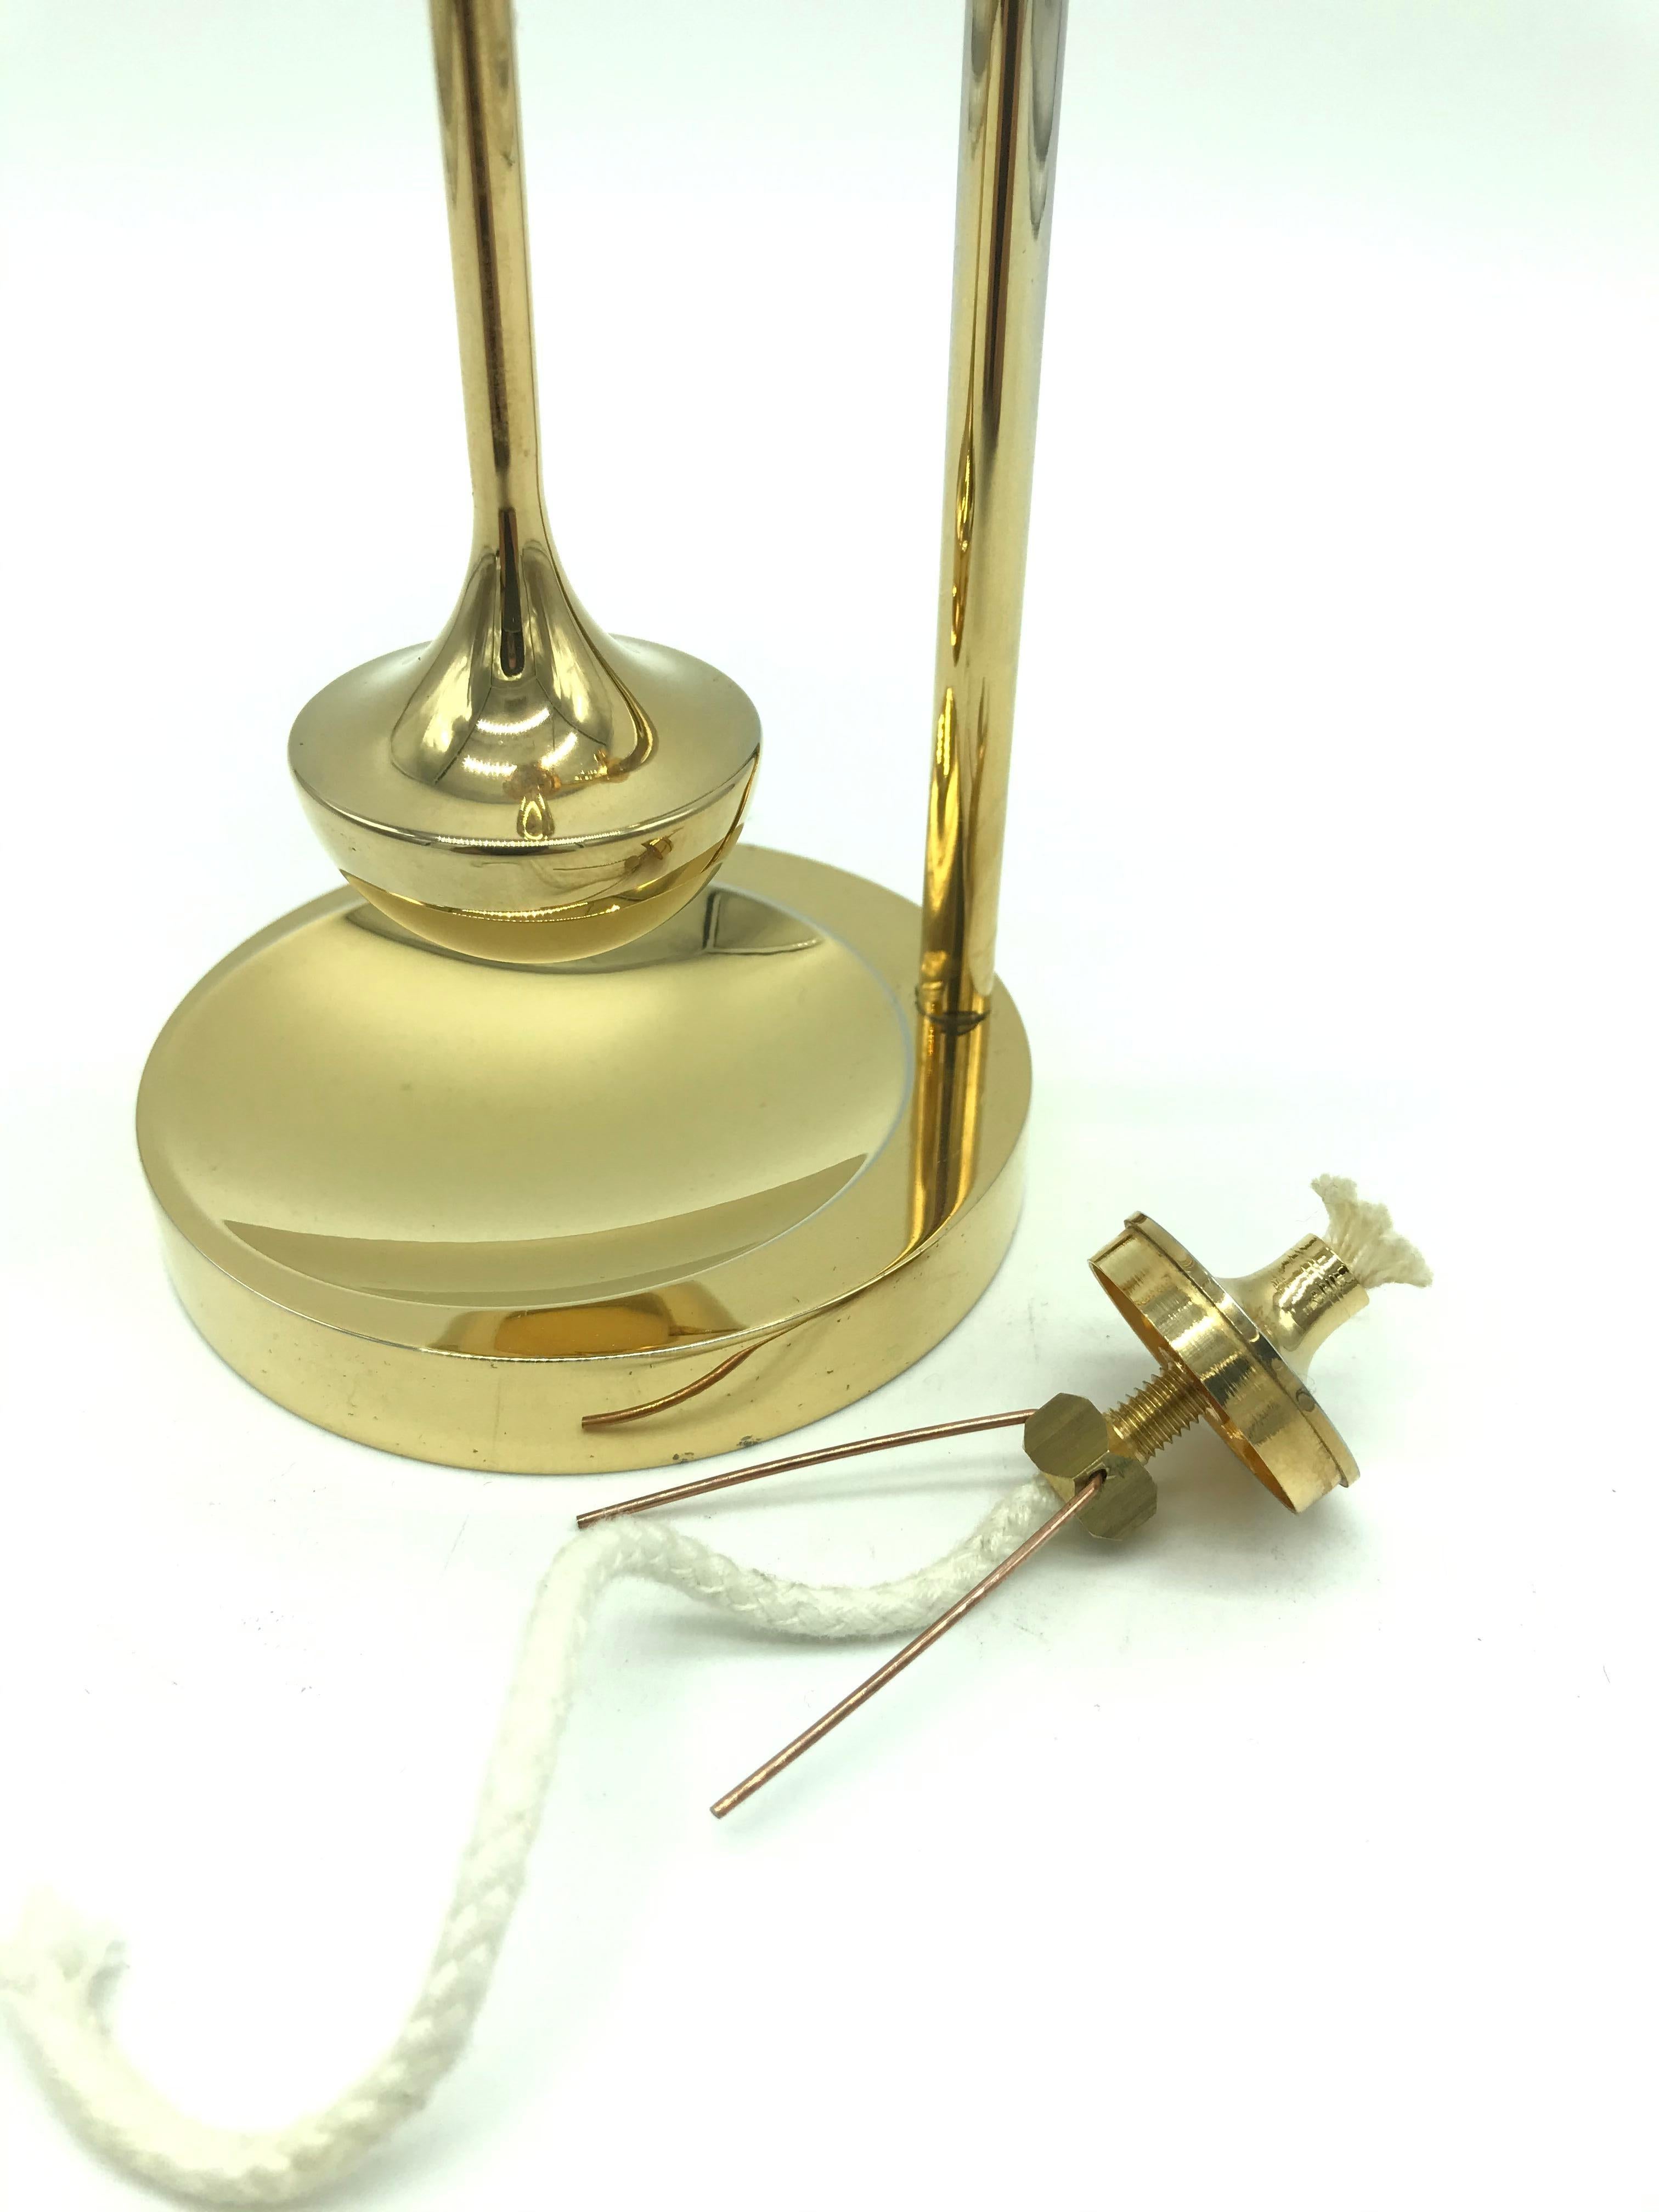 Hand-Crafted Vintage Unused Oil Lamp by Ilse Ammonsen in 24-Carat Gold Plate